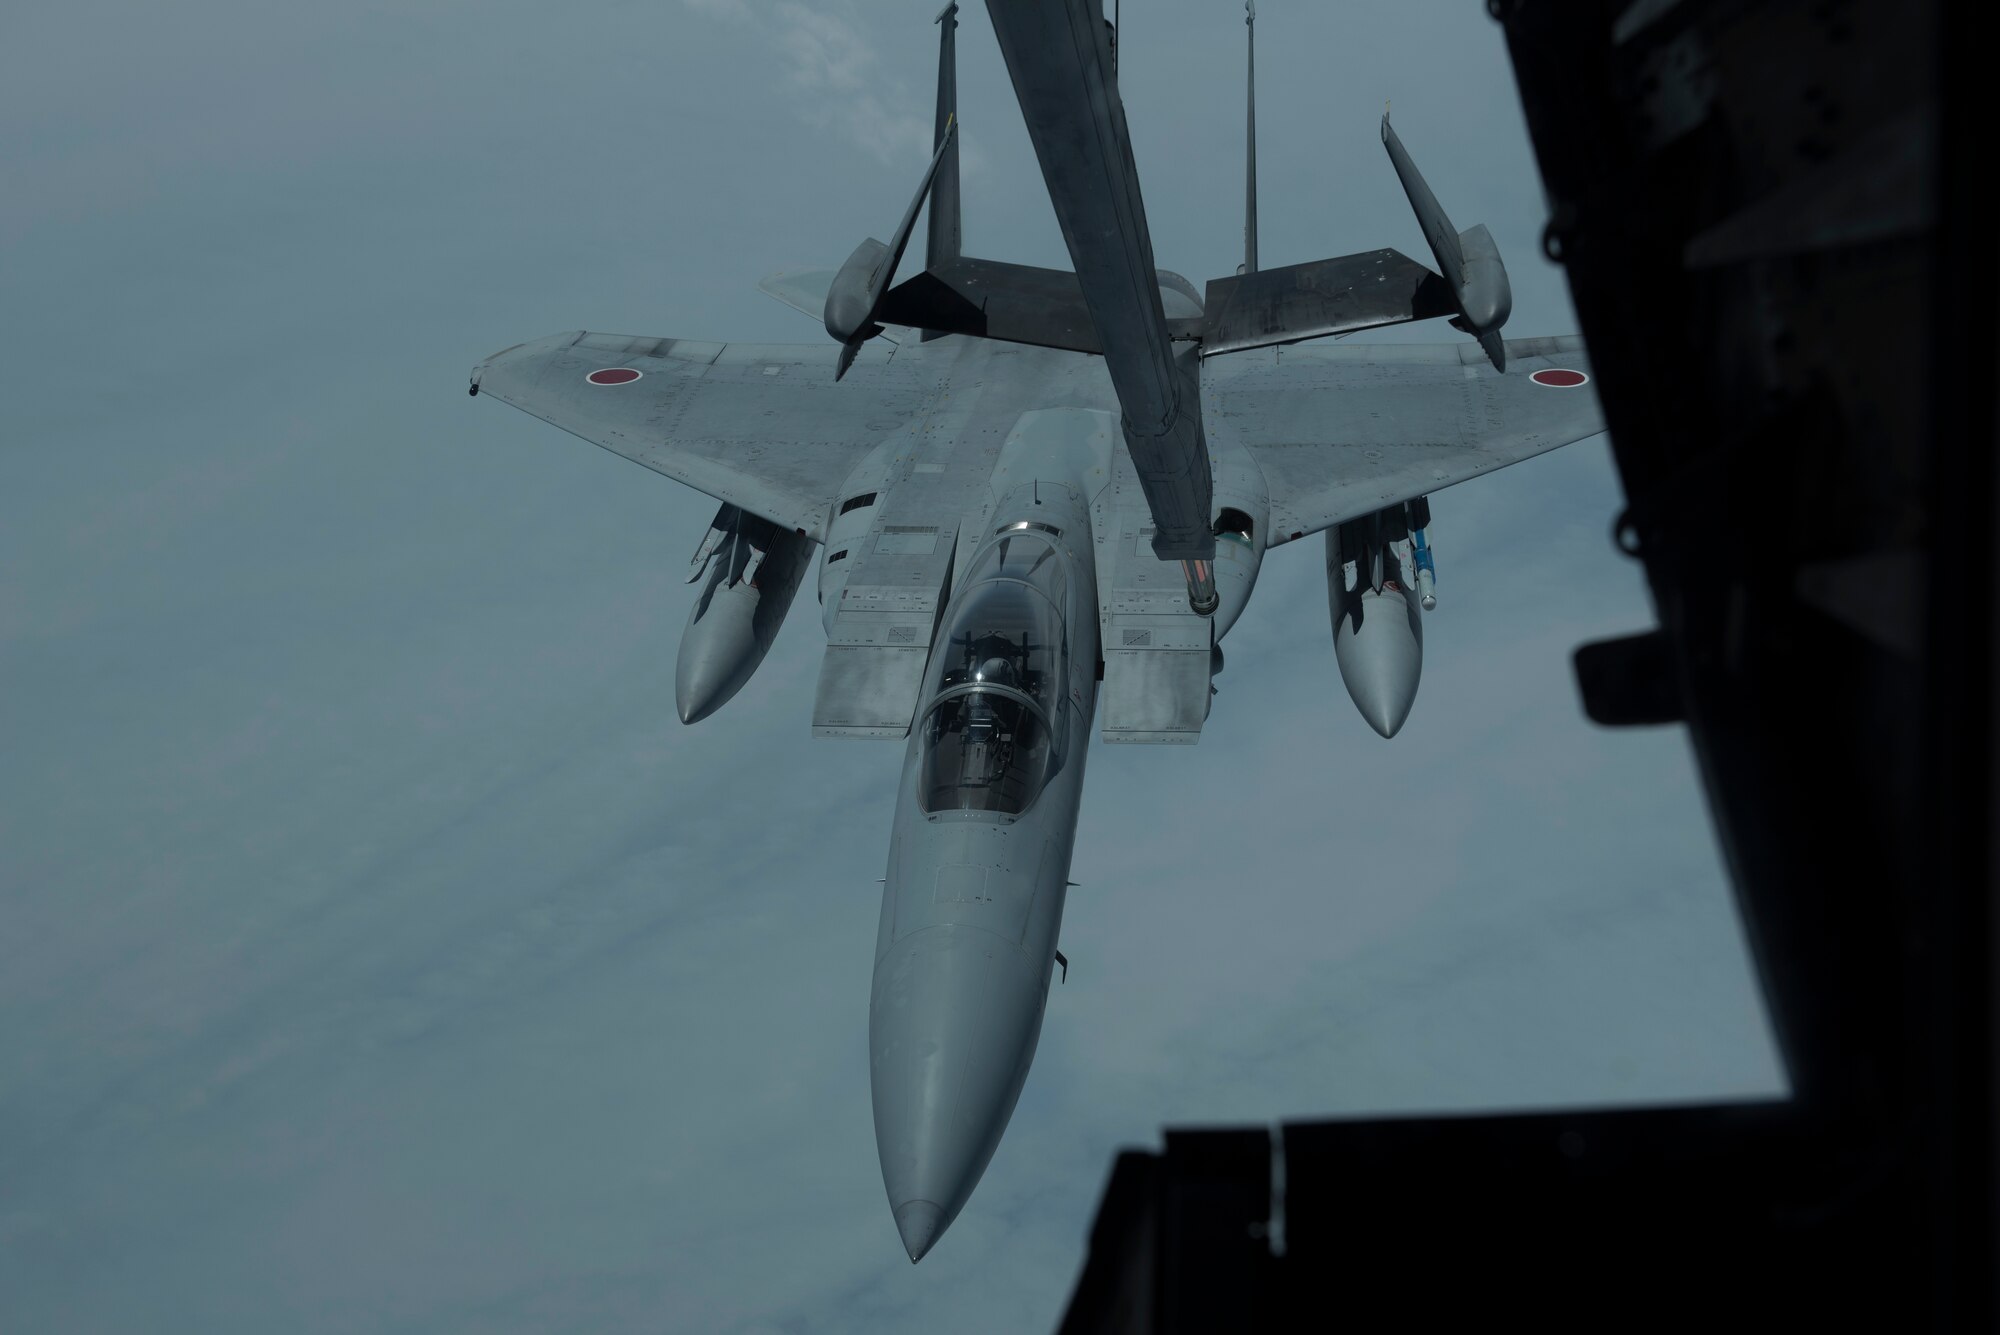 An F-15 is refueled by a U.S. Air Force KC-10 Extender from Travis Air Force Base, Calif., during a mission in the Indo-Pacific theater June 4, 2018. The KC-10 refueled six fighters from the Japan Air Self-Defense Force offloading more than 130,000 pounds of fuel enabling them to fly more than 2,900 nautical miles from Japan to Alaska. (U.S. Air Force photo by Tech. Sgt. James Hodgman)